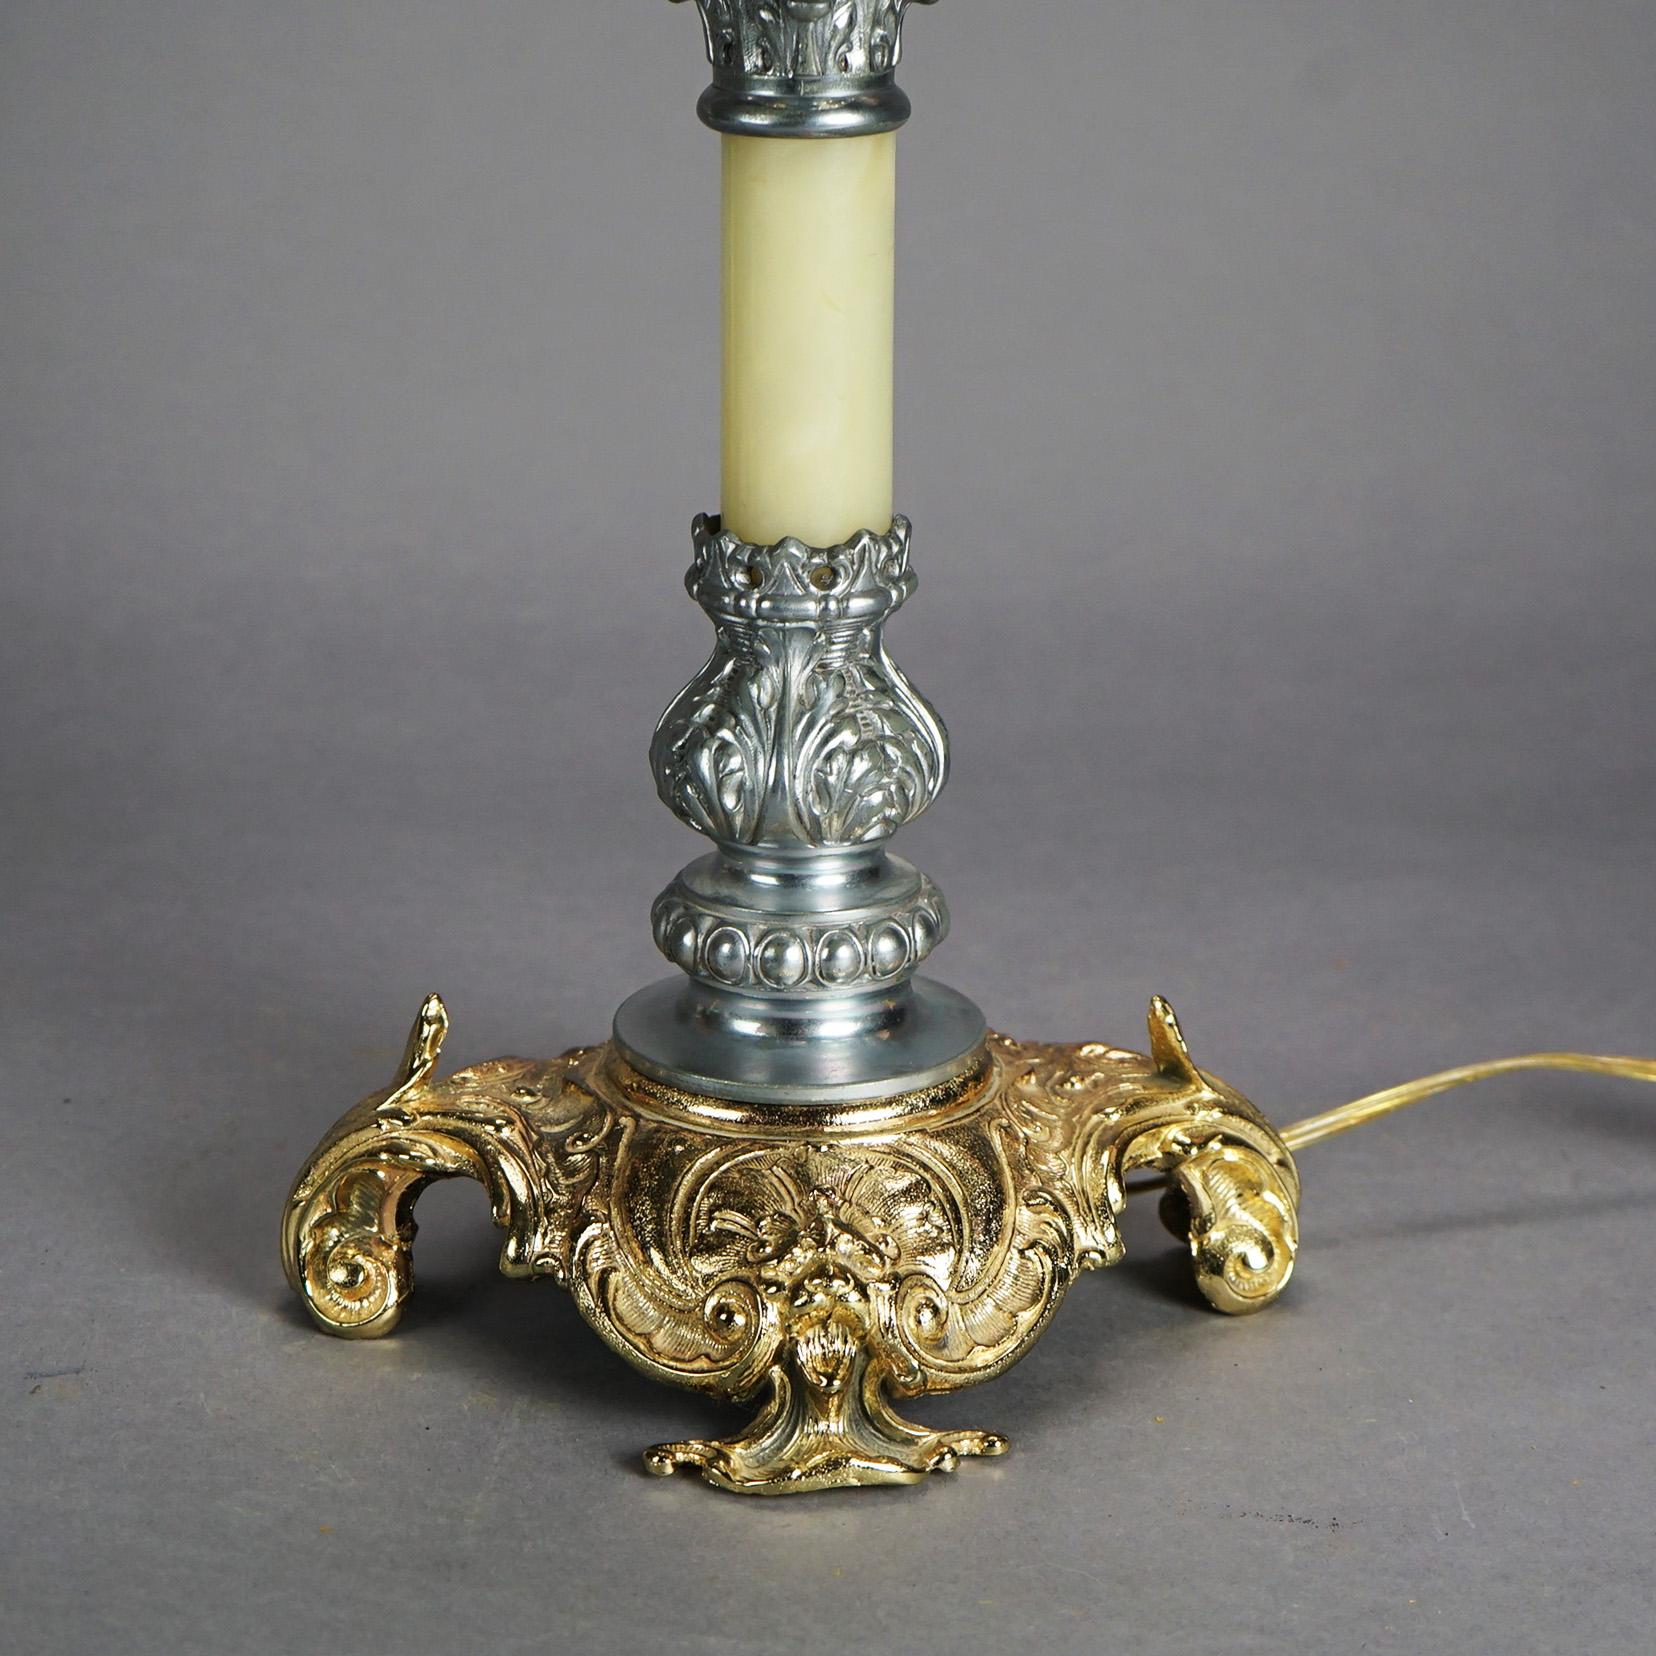 Hand-Painted Antique Gilt Metal & Onyx Victorian Parlor Lamp & Hand Painted Shade, c1890 For Sale